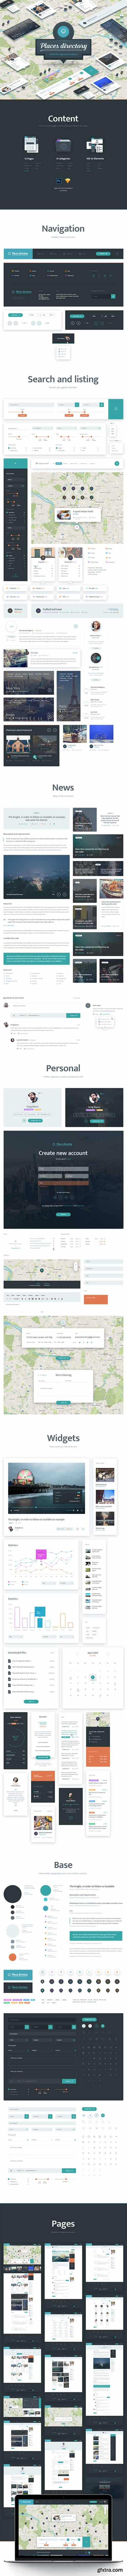 Places Directory - UI tool kit for managing advertisements via map function